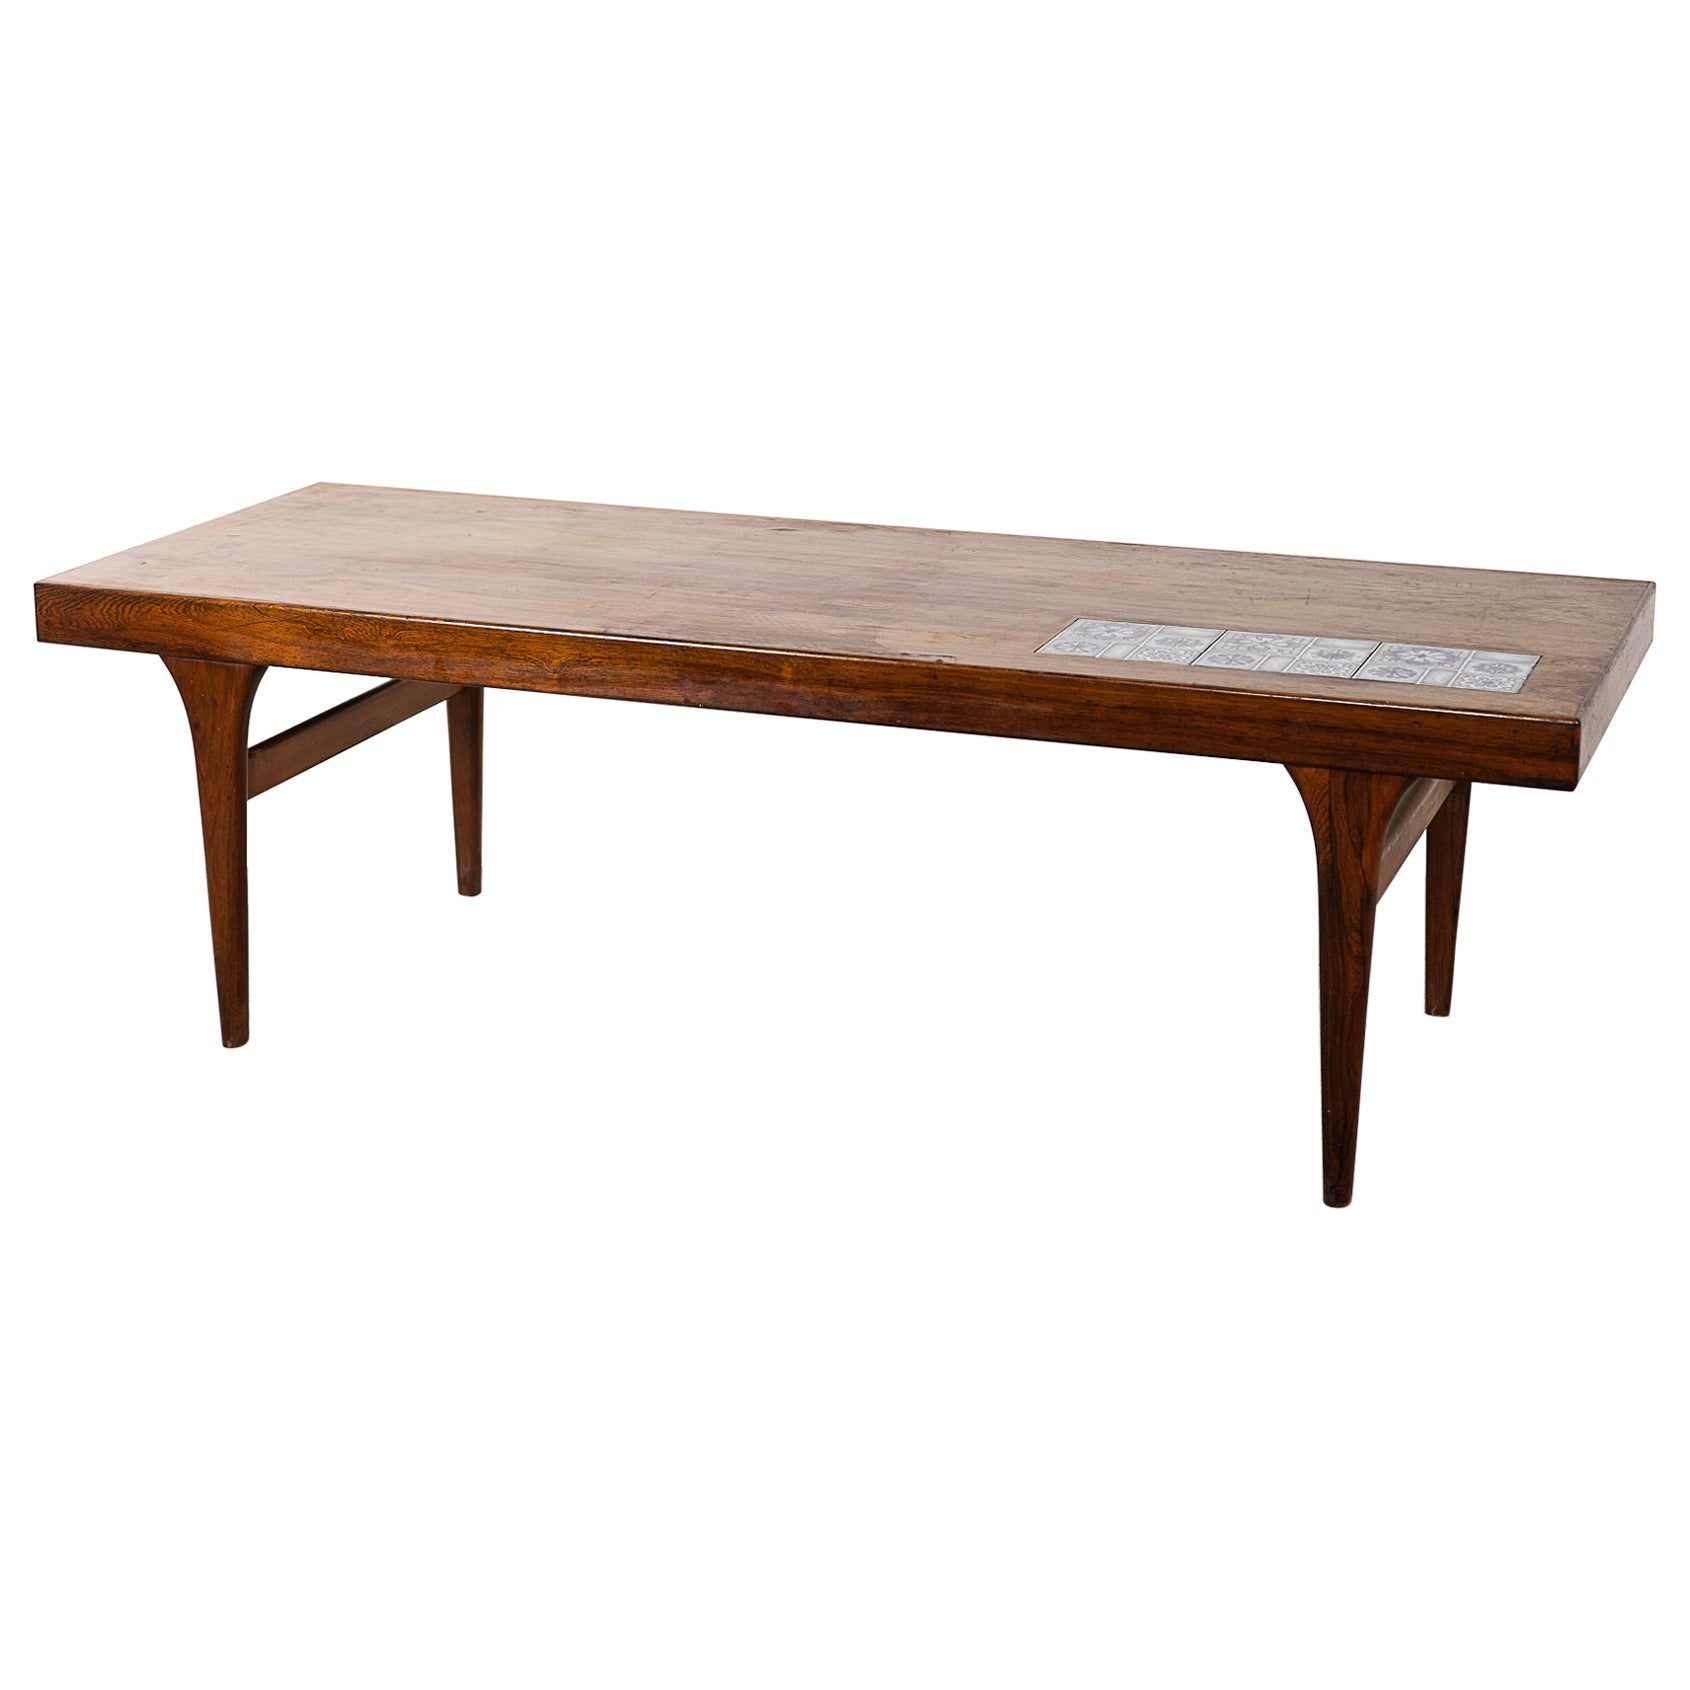 Danish Mid-Century Modern Rosewood & Tile Coffee Table by Johannes Andersen For Sale